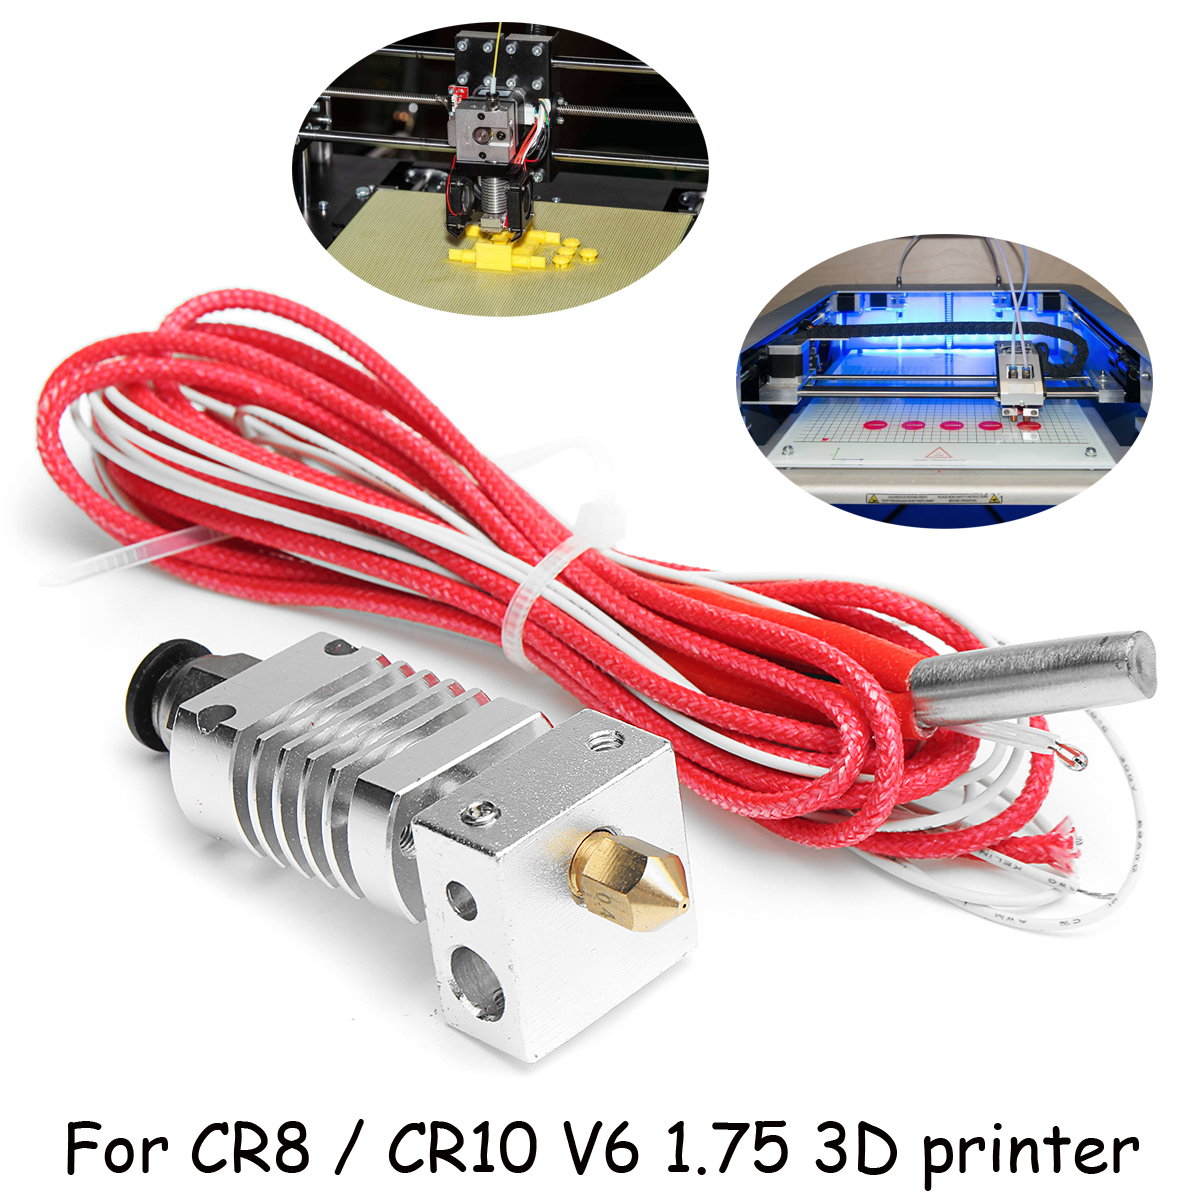 V6 1.75mm All Metal J-Head Hotend Remote Extruder Kit with Heating tube for CR10 3D Printer 18